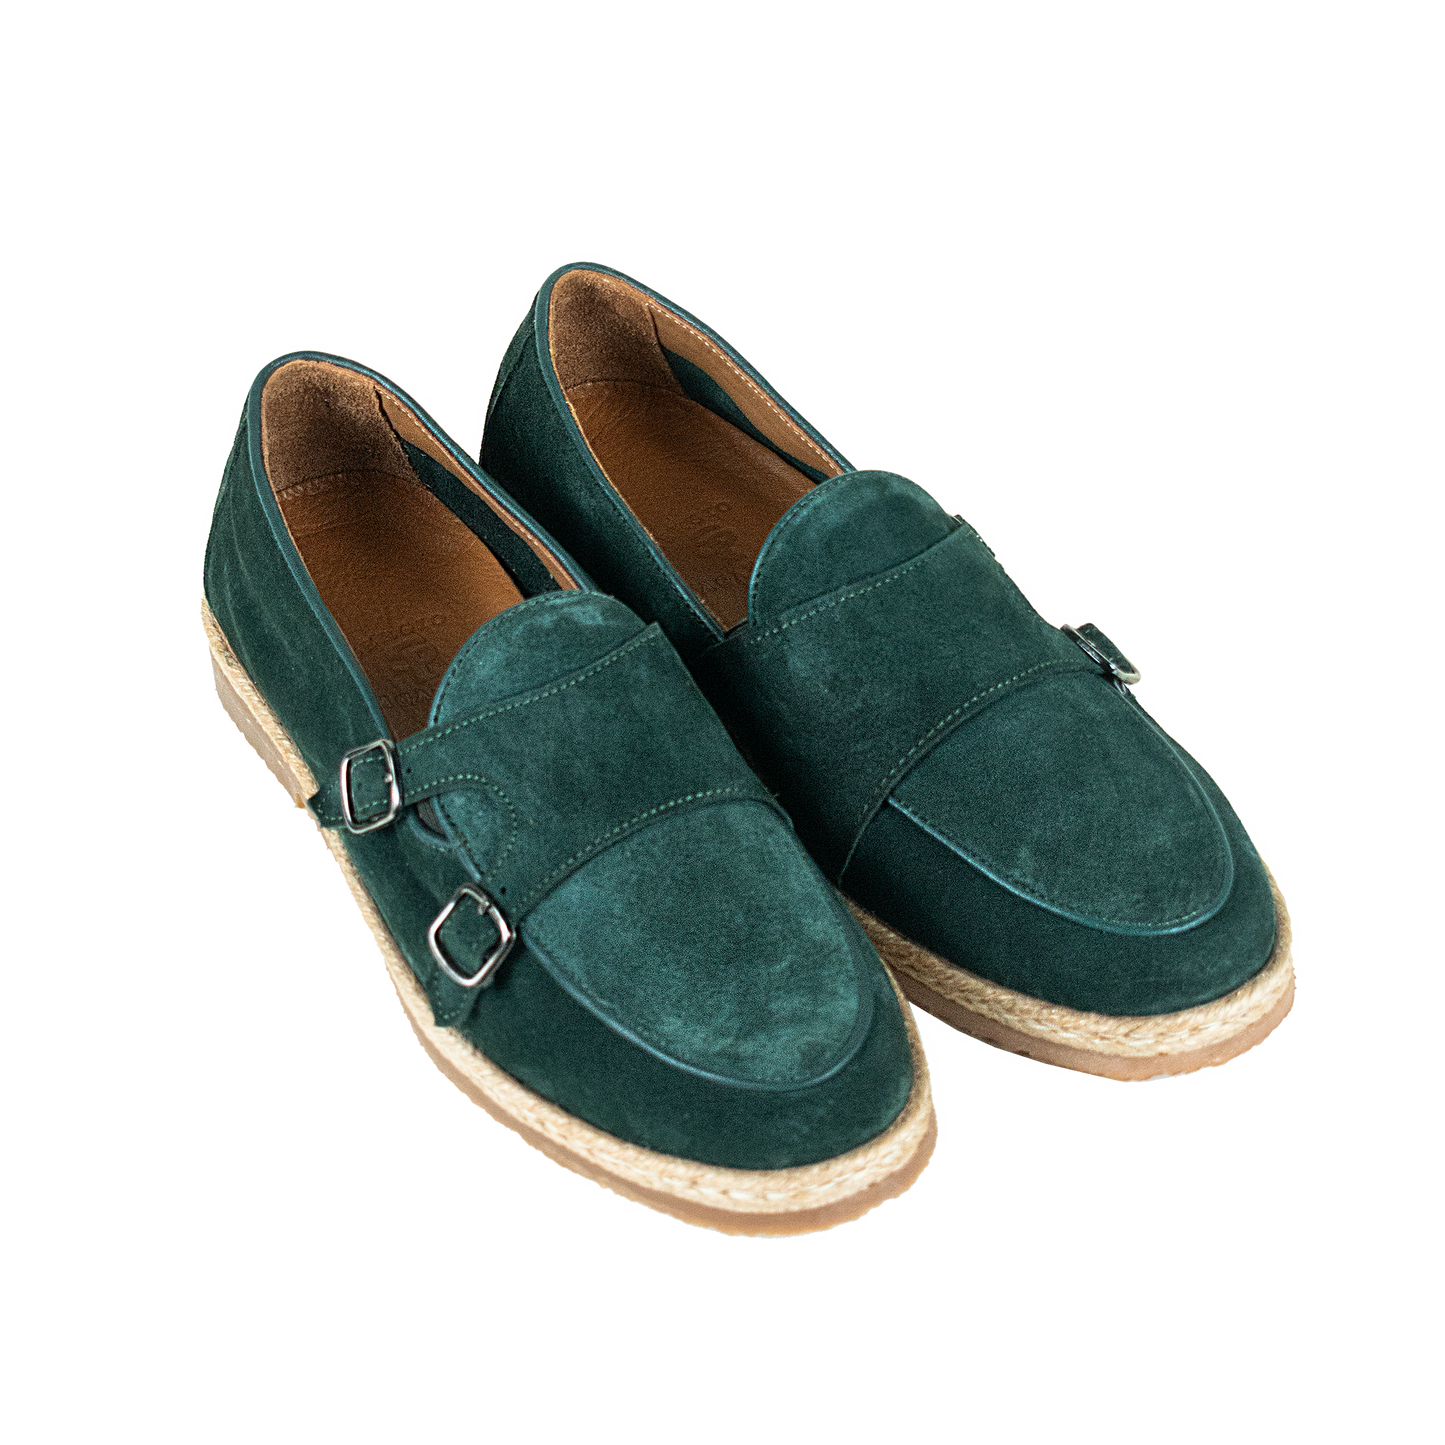 Green suede loafer